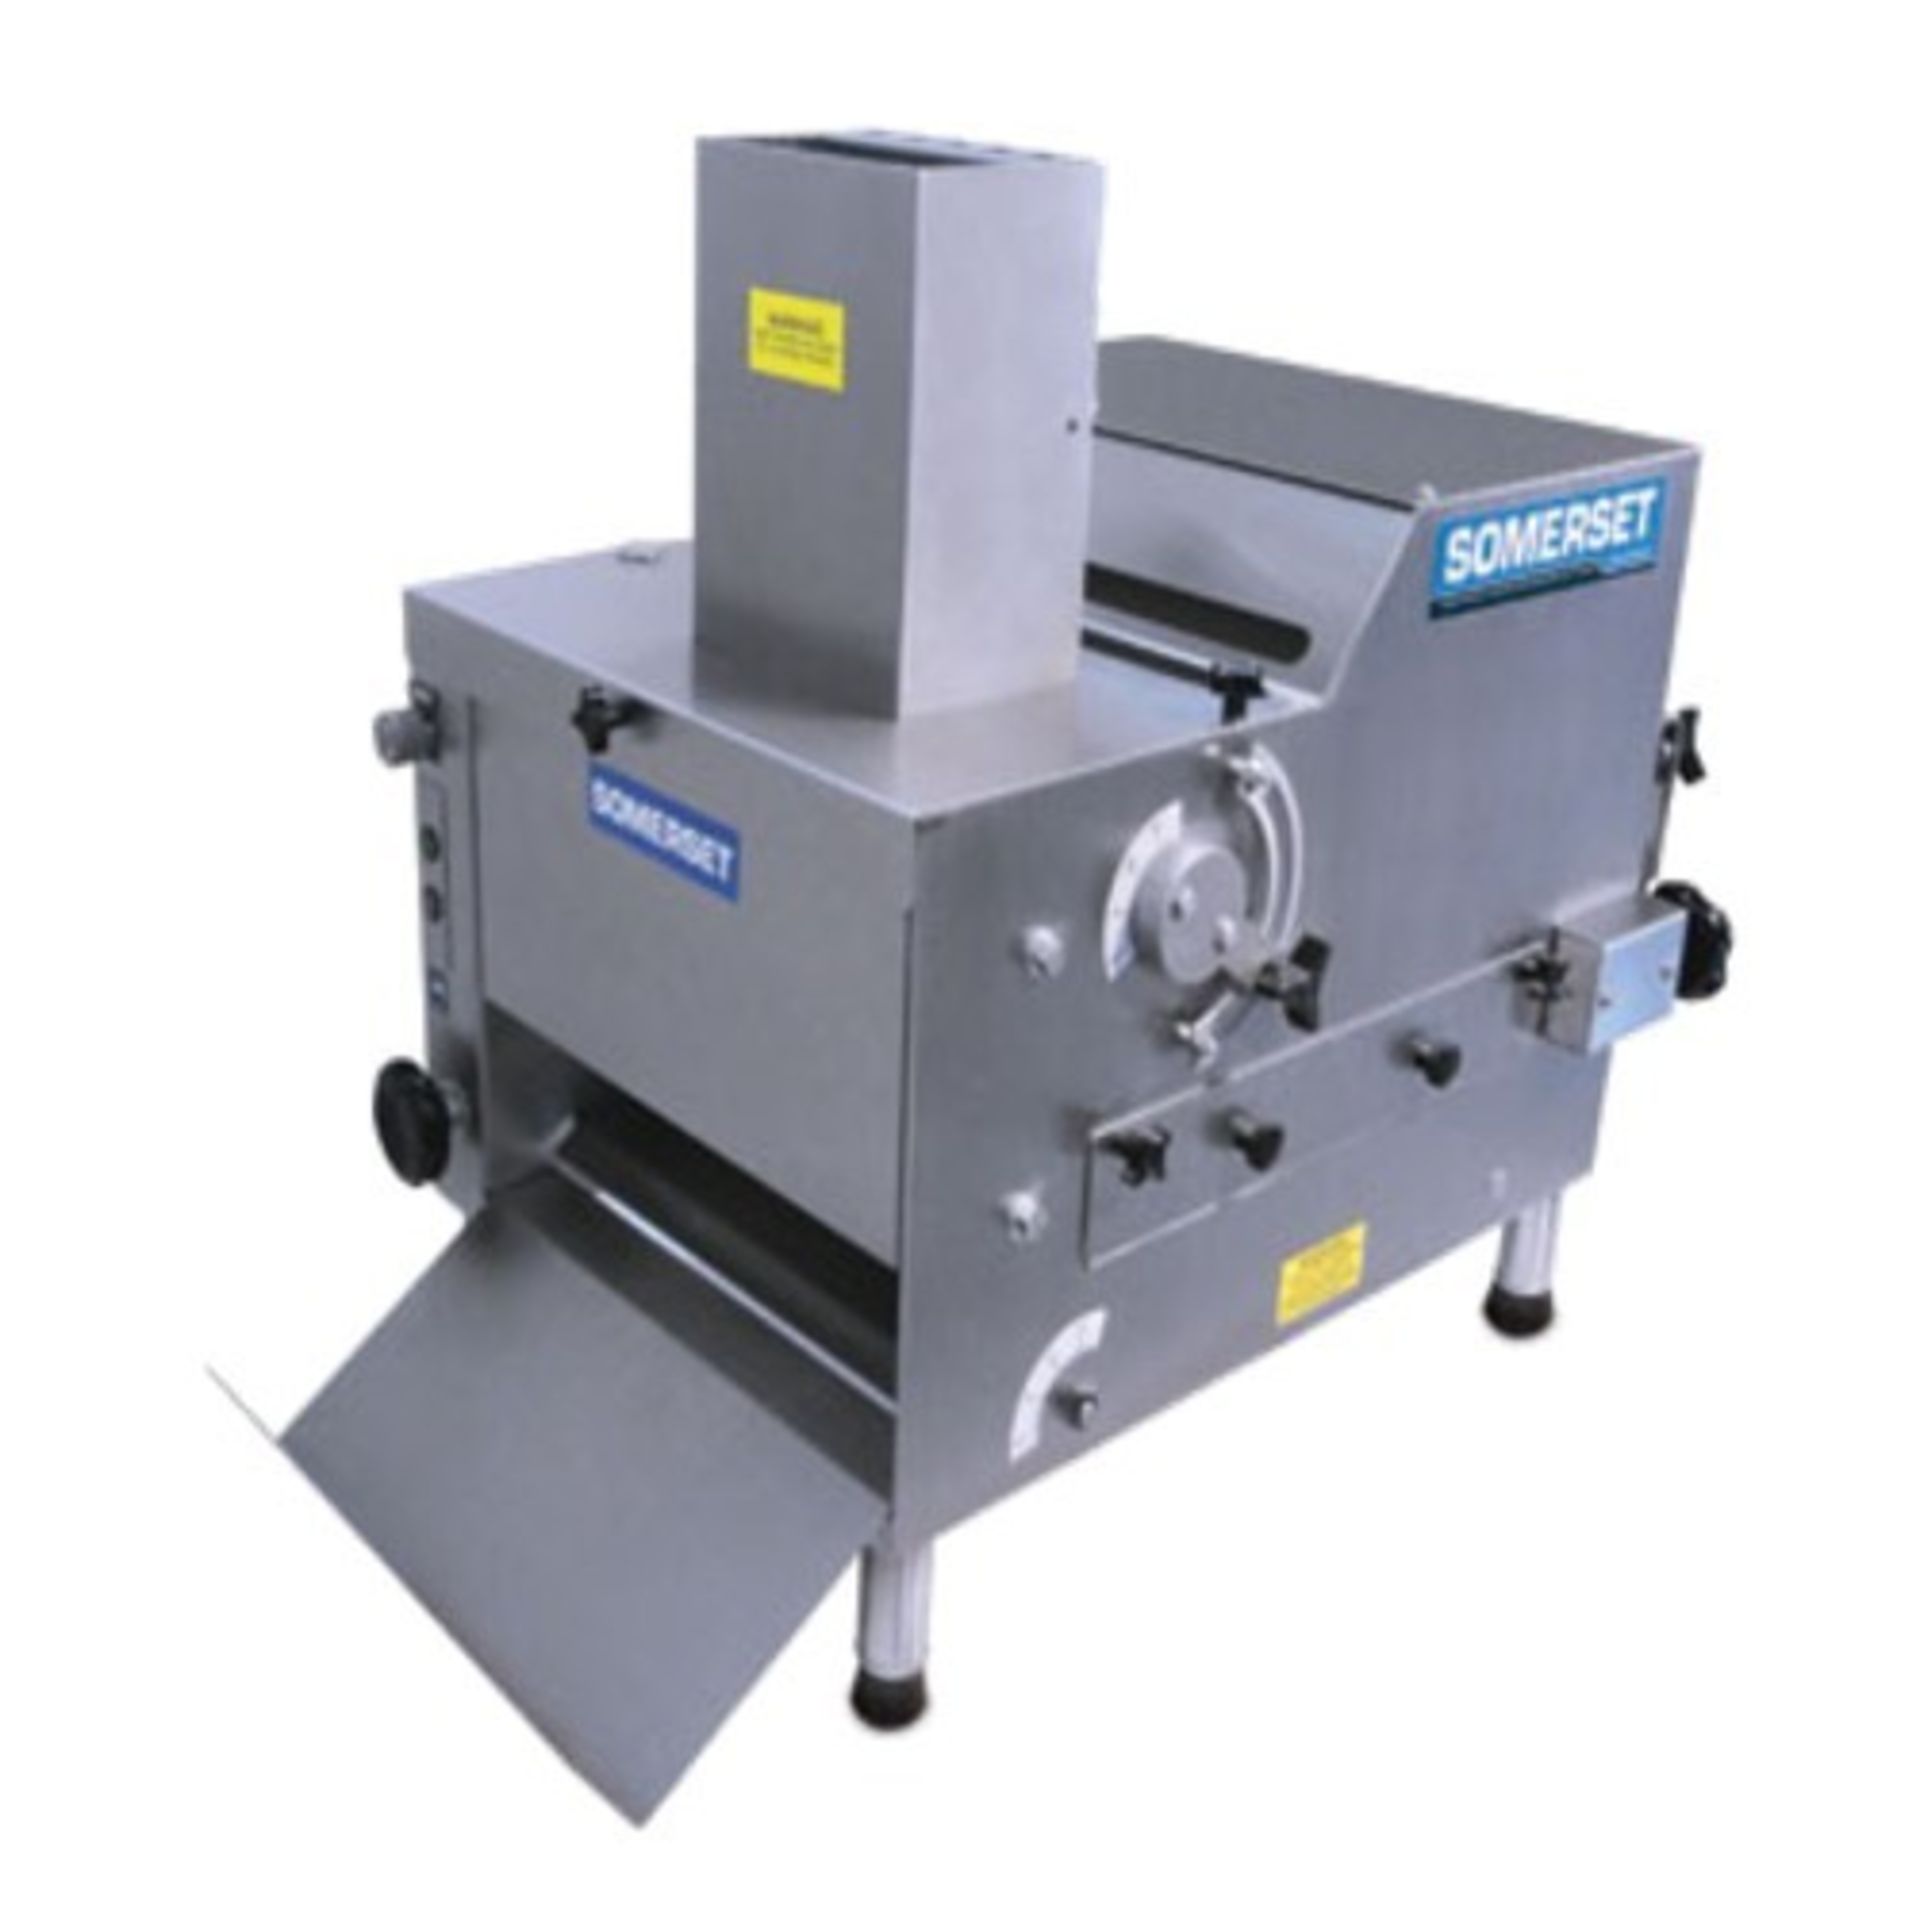 Somerset CDR-250 dough Moulder for 6-20" bread loaves! Turn large batches of dough into beautiful